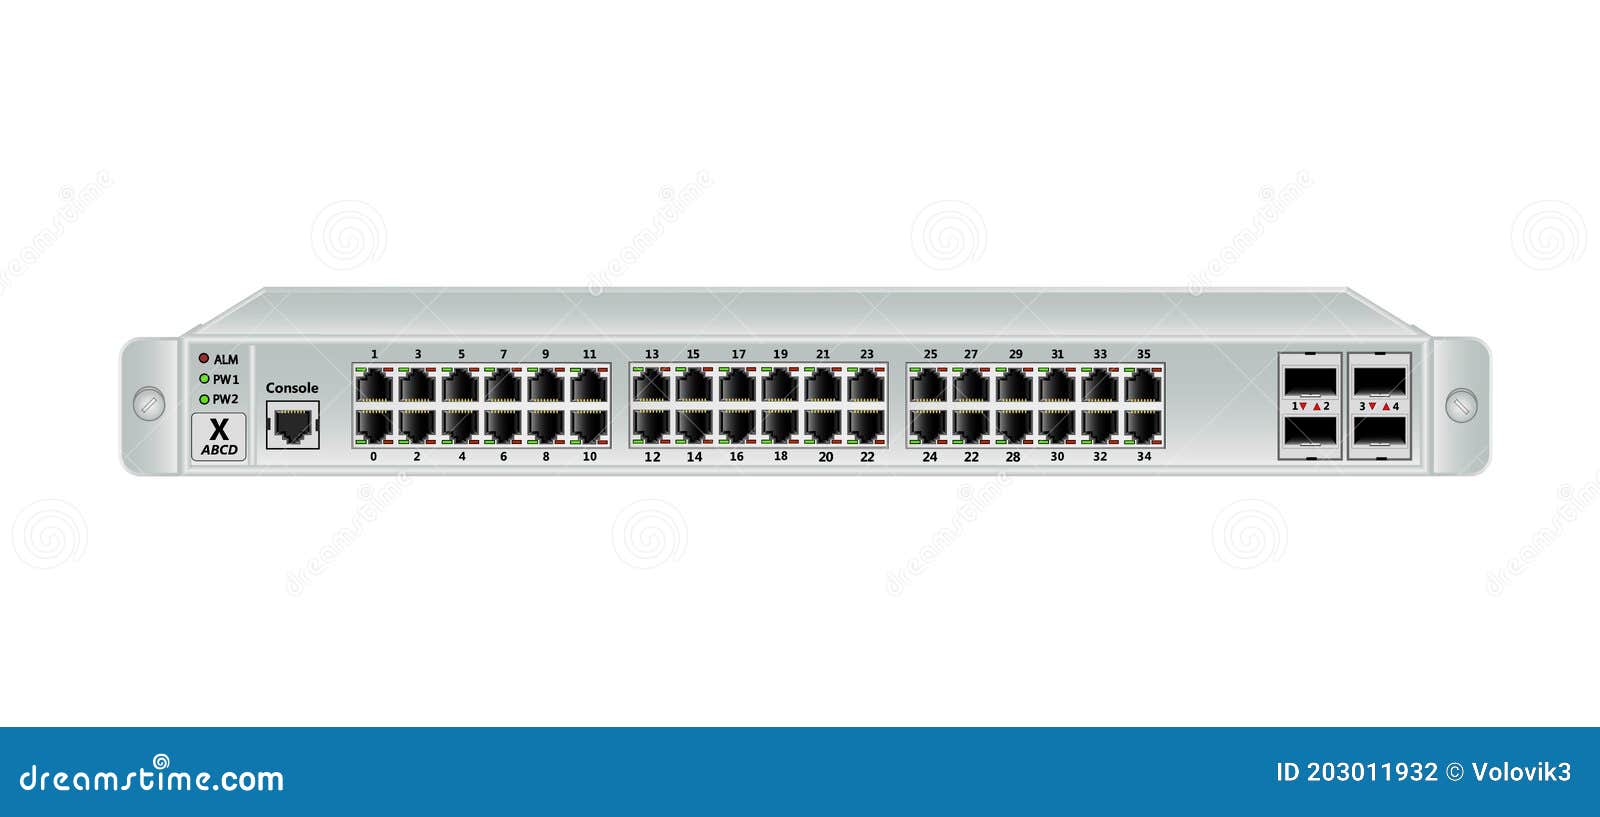 the ethernet 1u switch for mounting with a 19-inch rack with 40 ports, including four backbones port. one consol port.